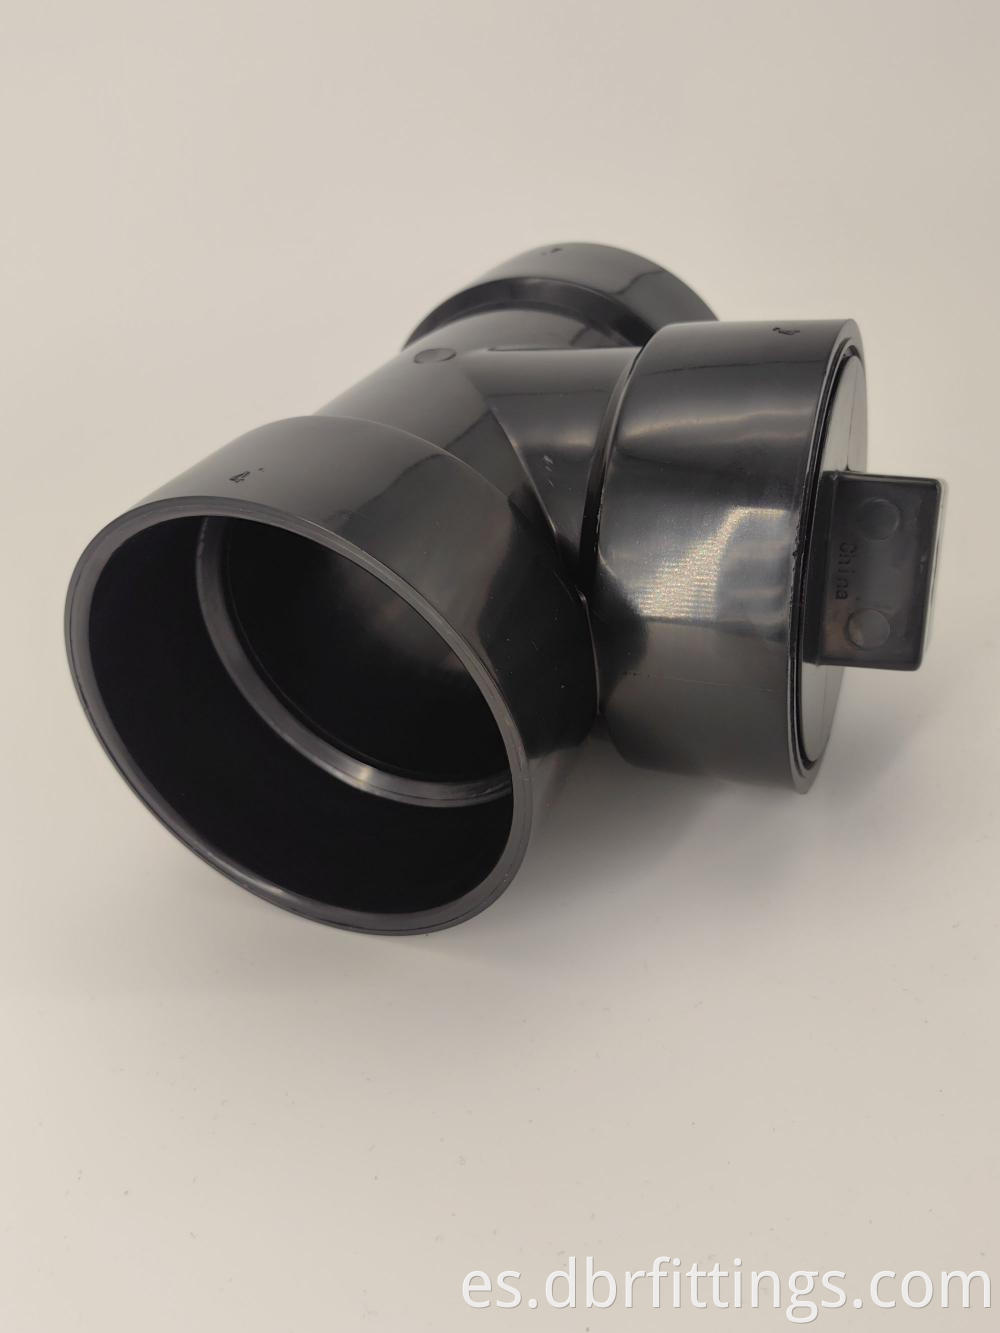 ABS fittings CLEANOUT TEE WITH PLUG